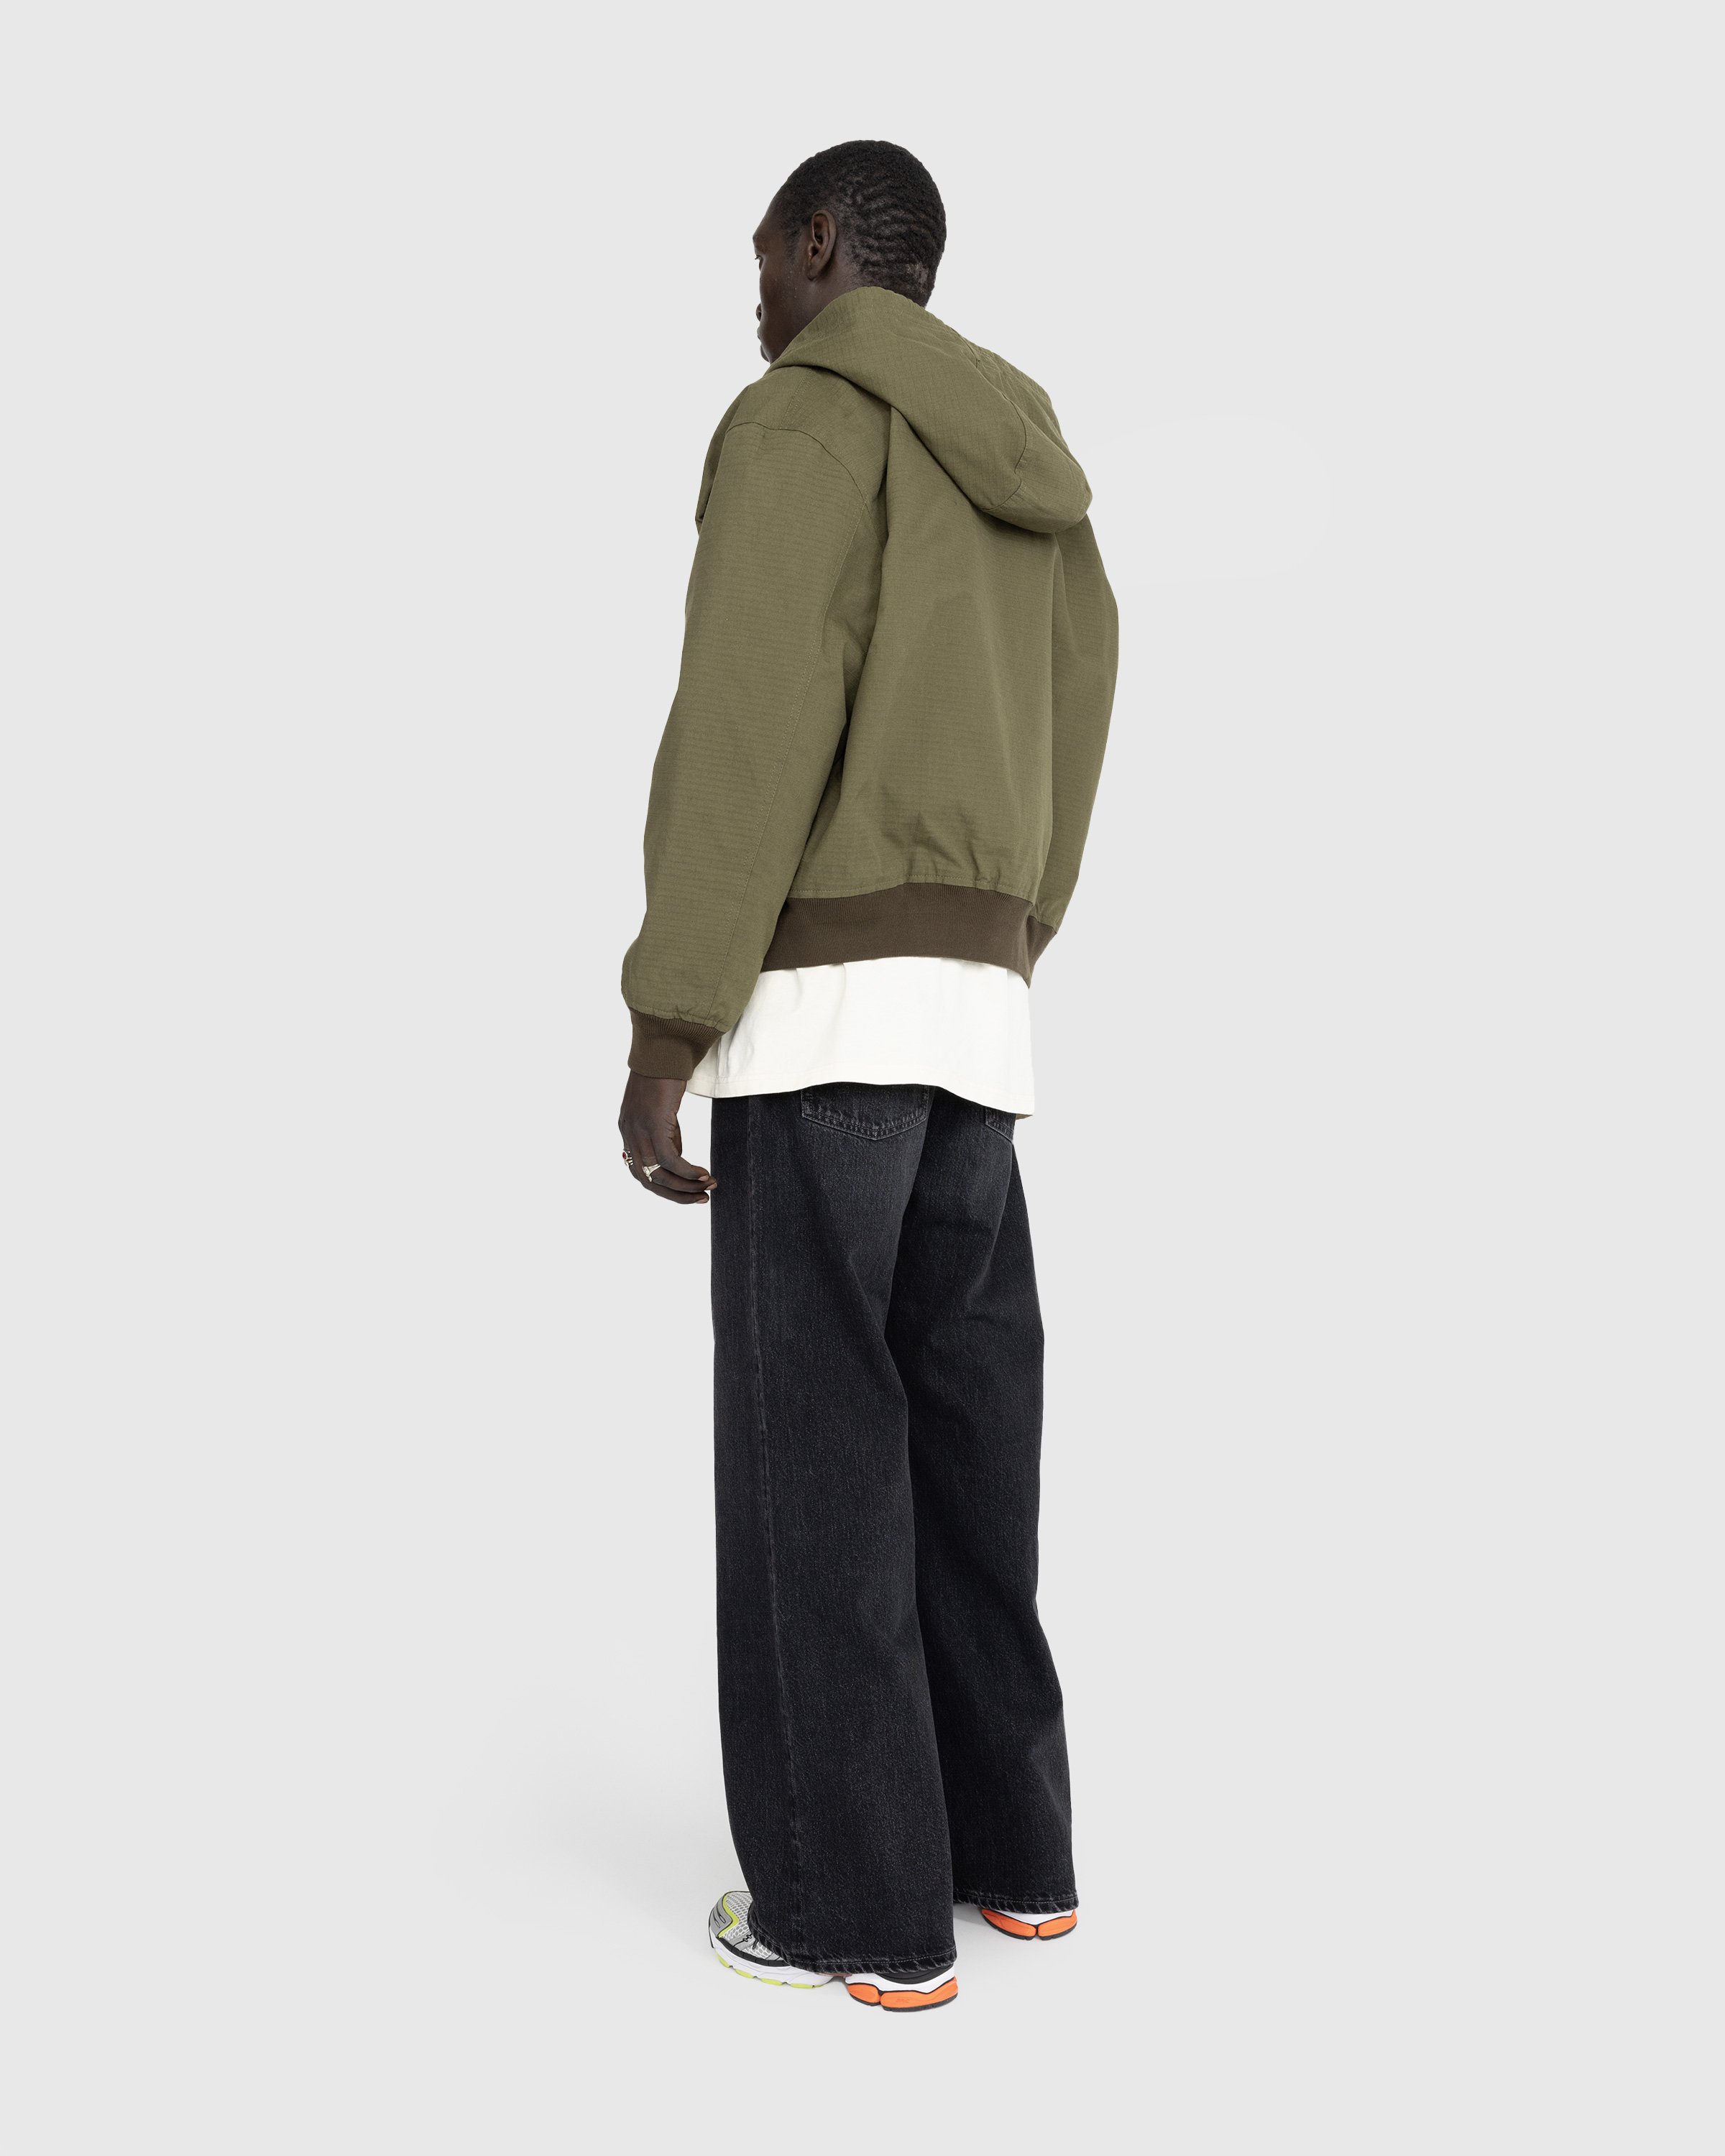 Acne Studios - Ripstop Padded Jacket Olive Green - Clothing - Green - Image 4